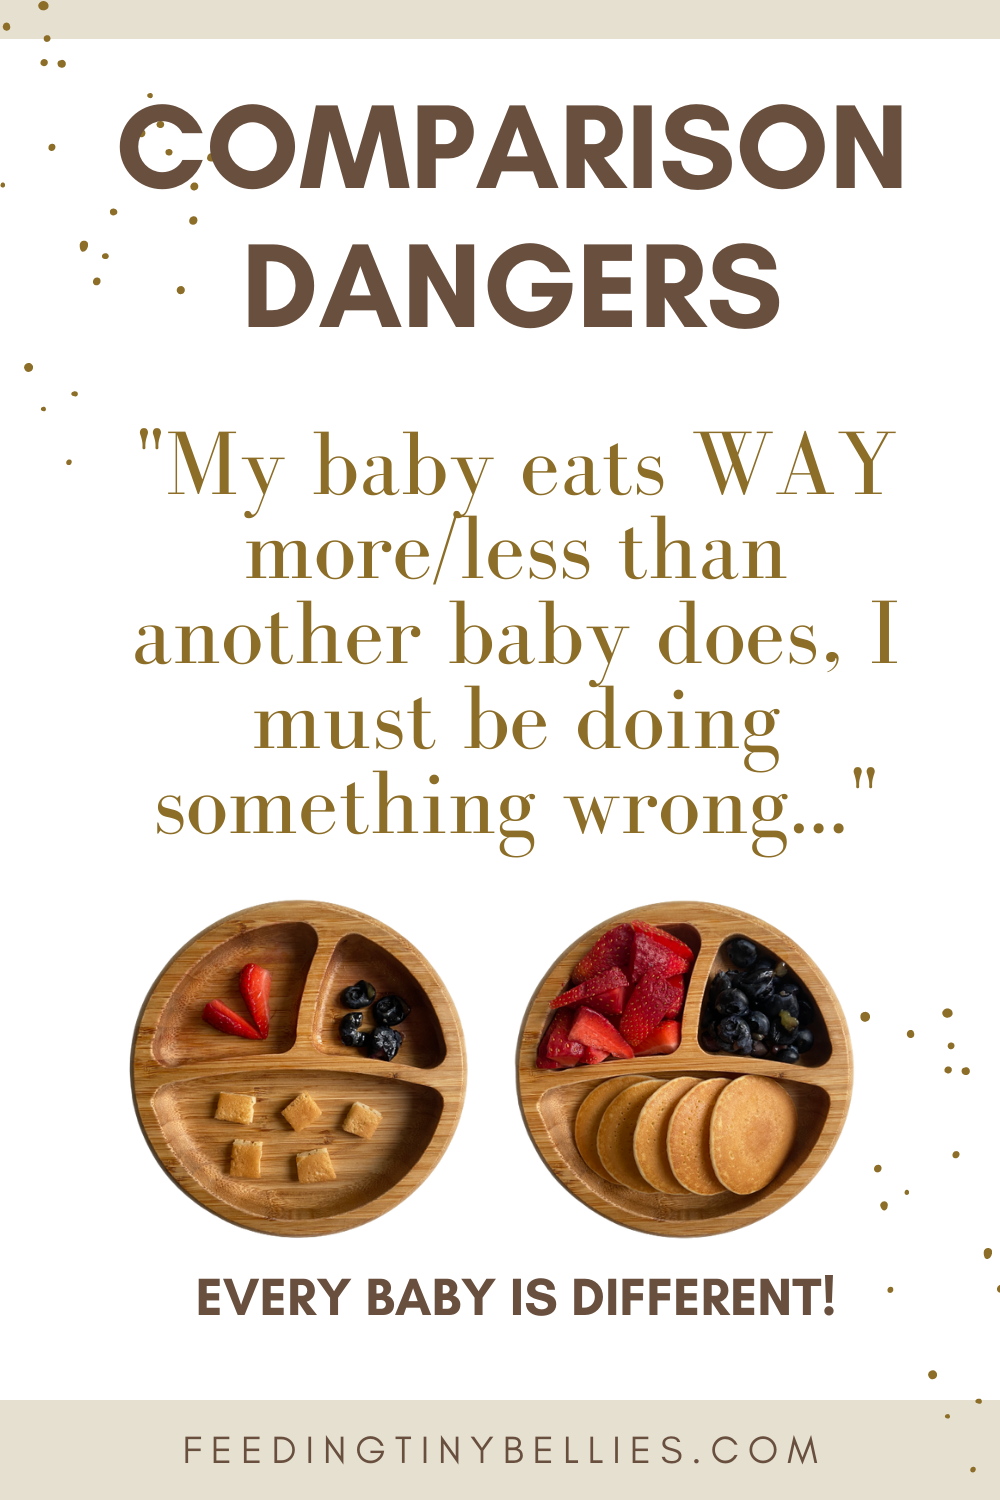 Comparison dangers - Every baby is different!